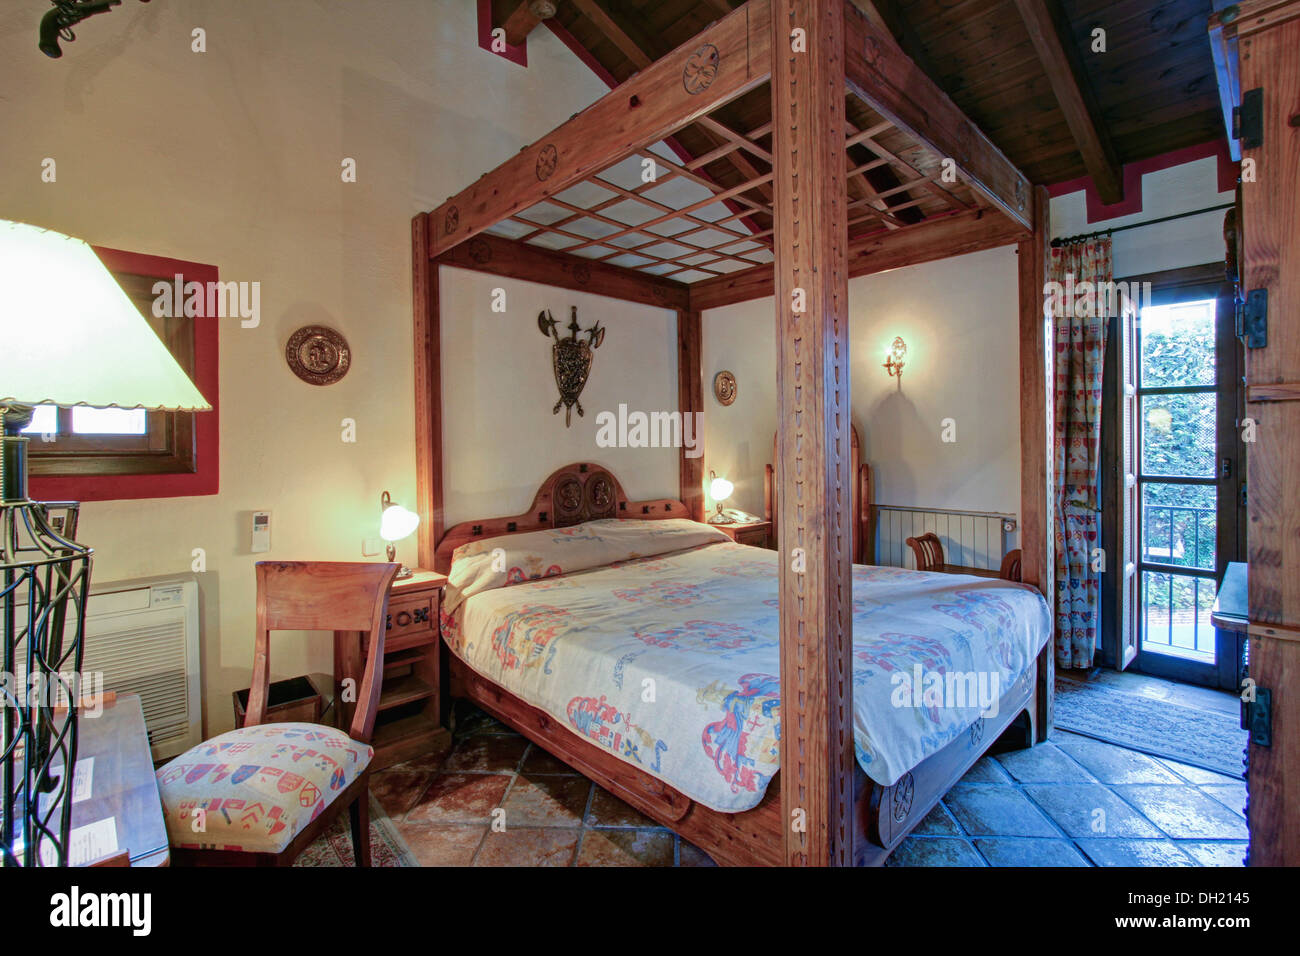 Rustic Wooden Four Poster Bed In Bedroom In Spanish Country Villa